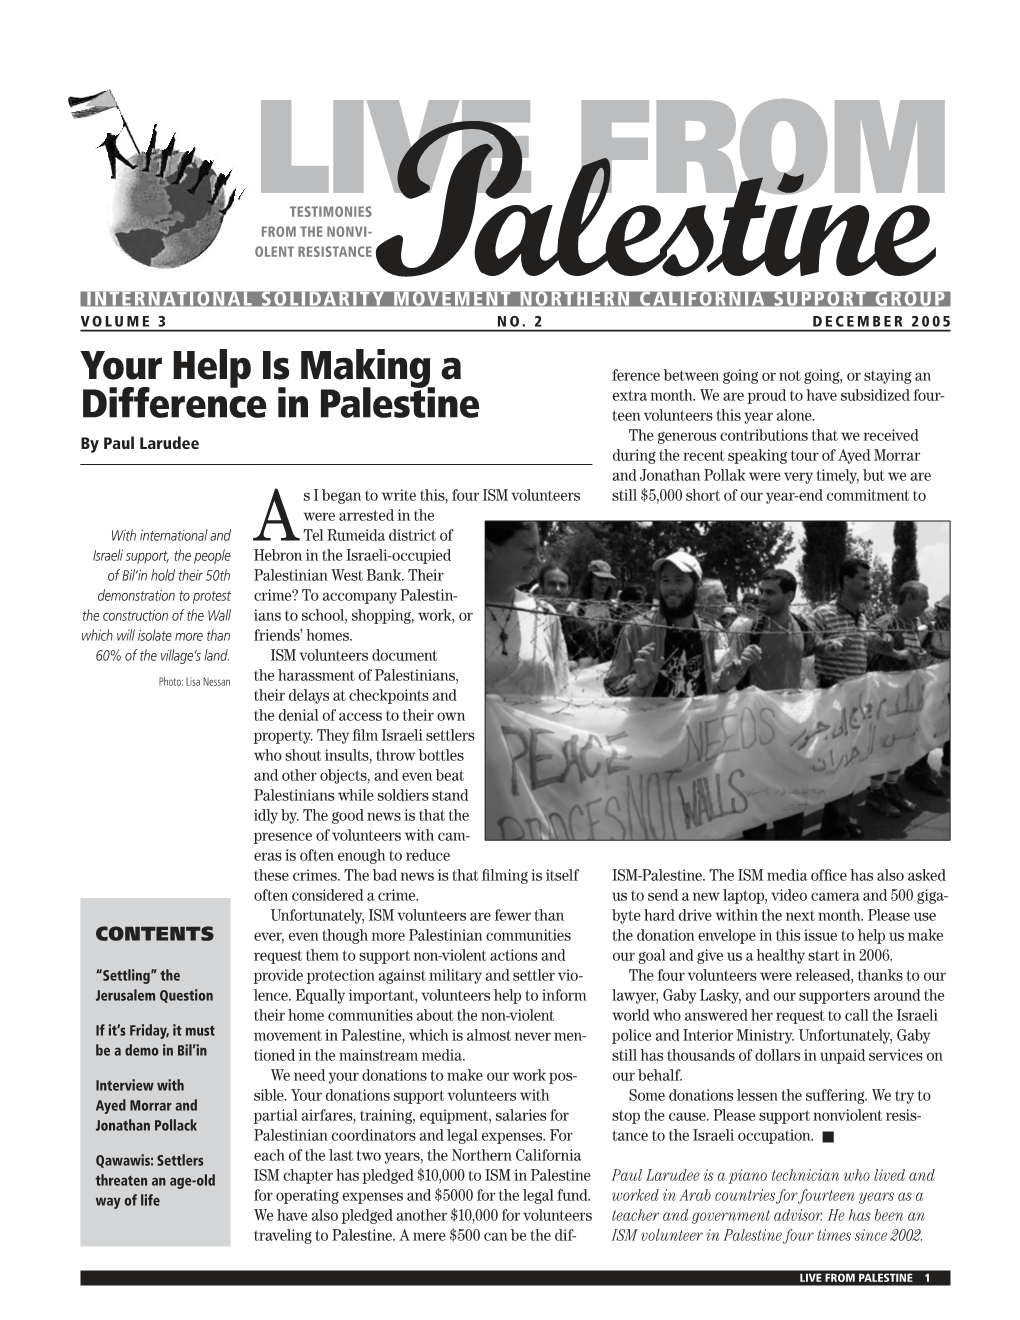 Your Help Is Making a Difference in Palestine